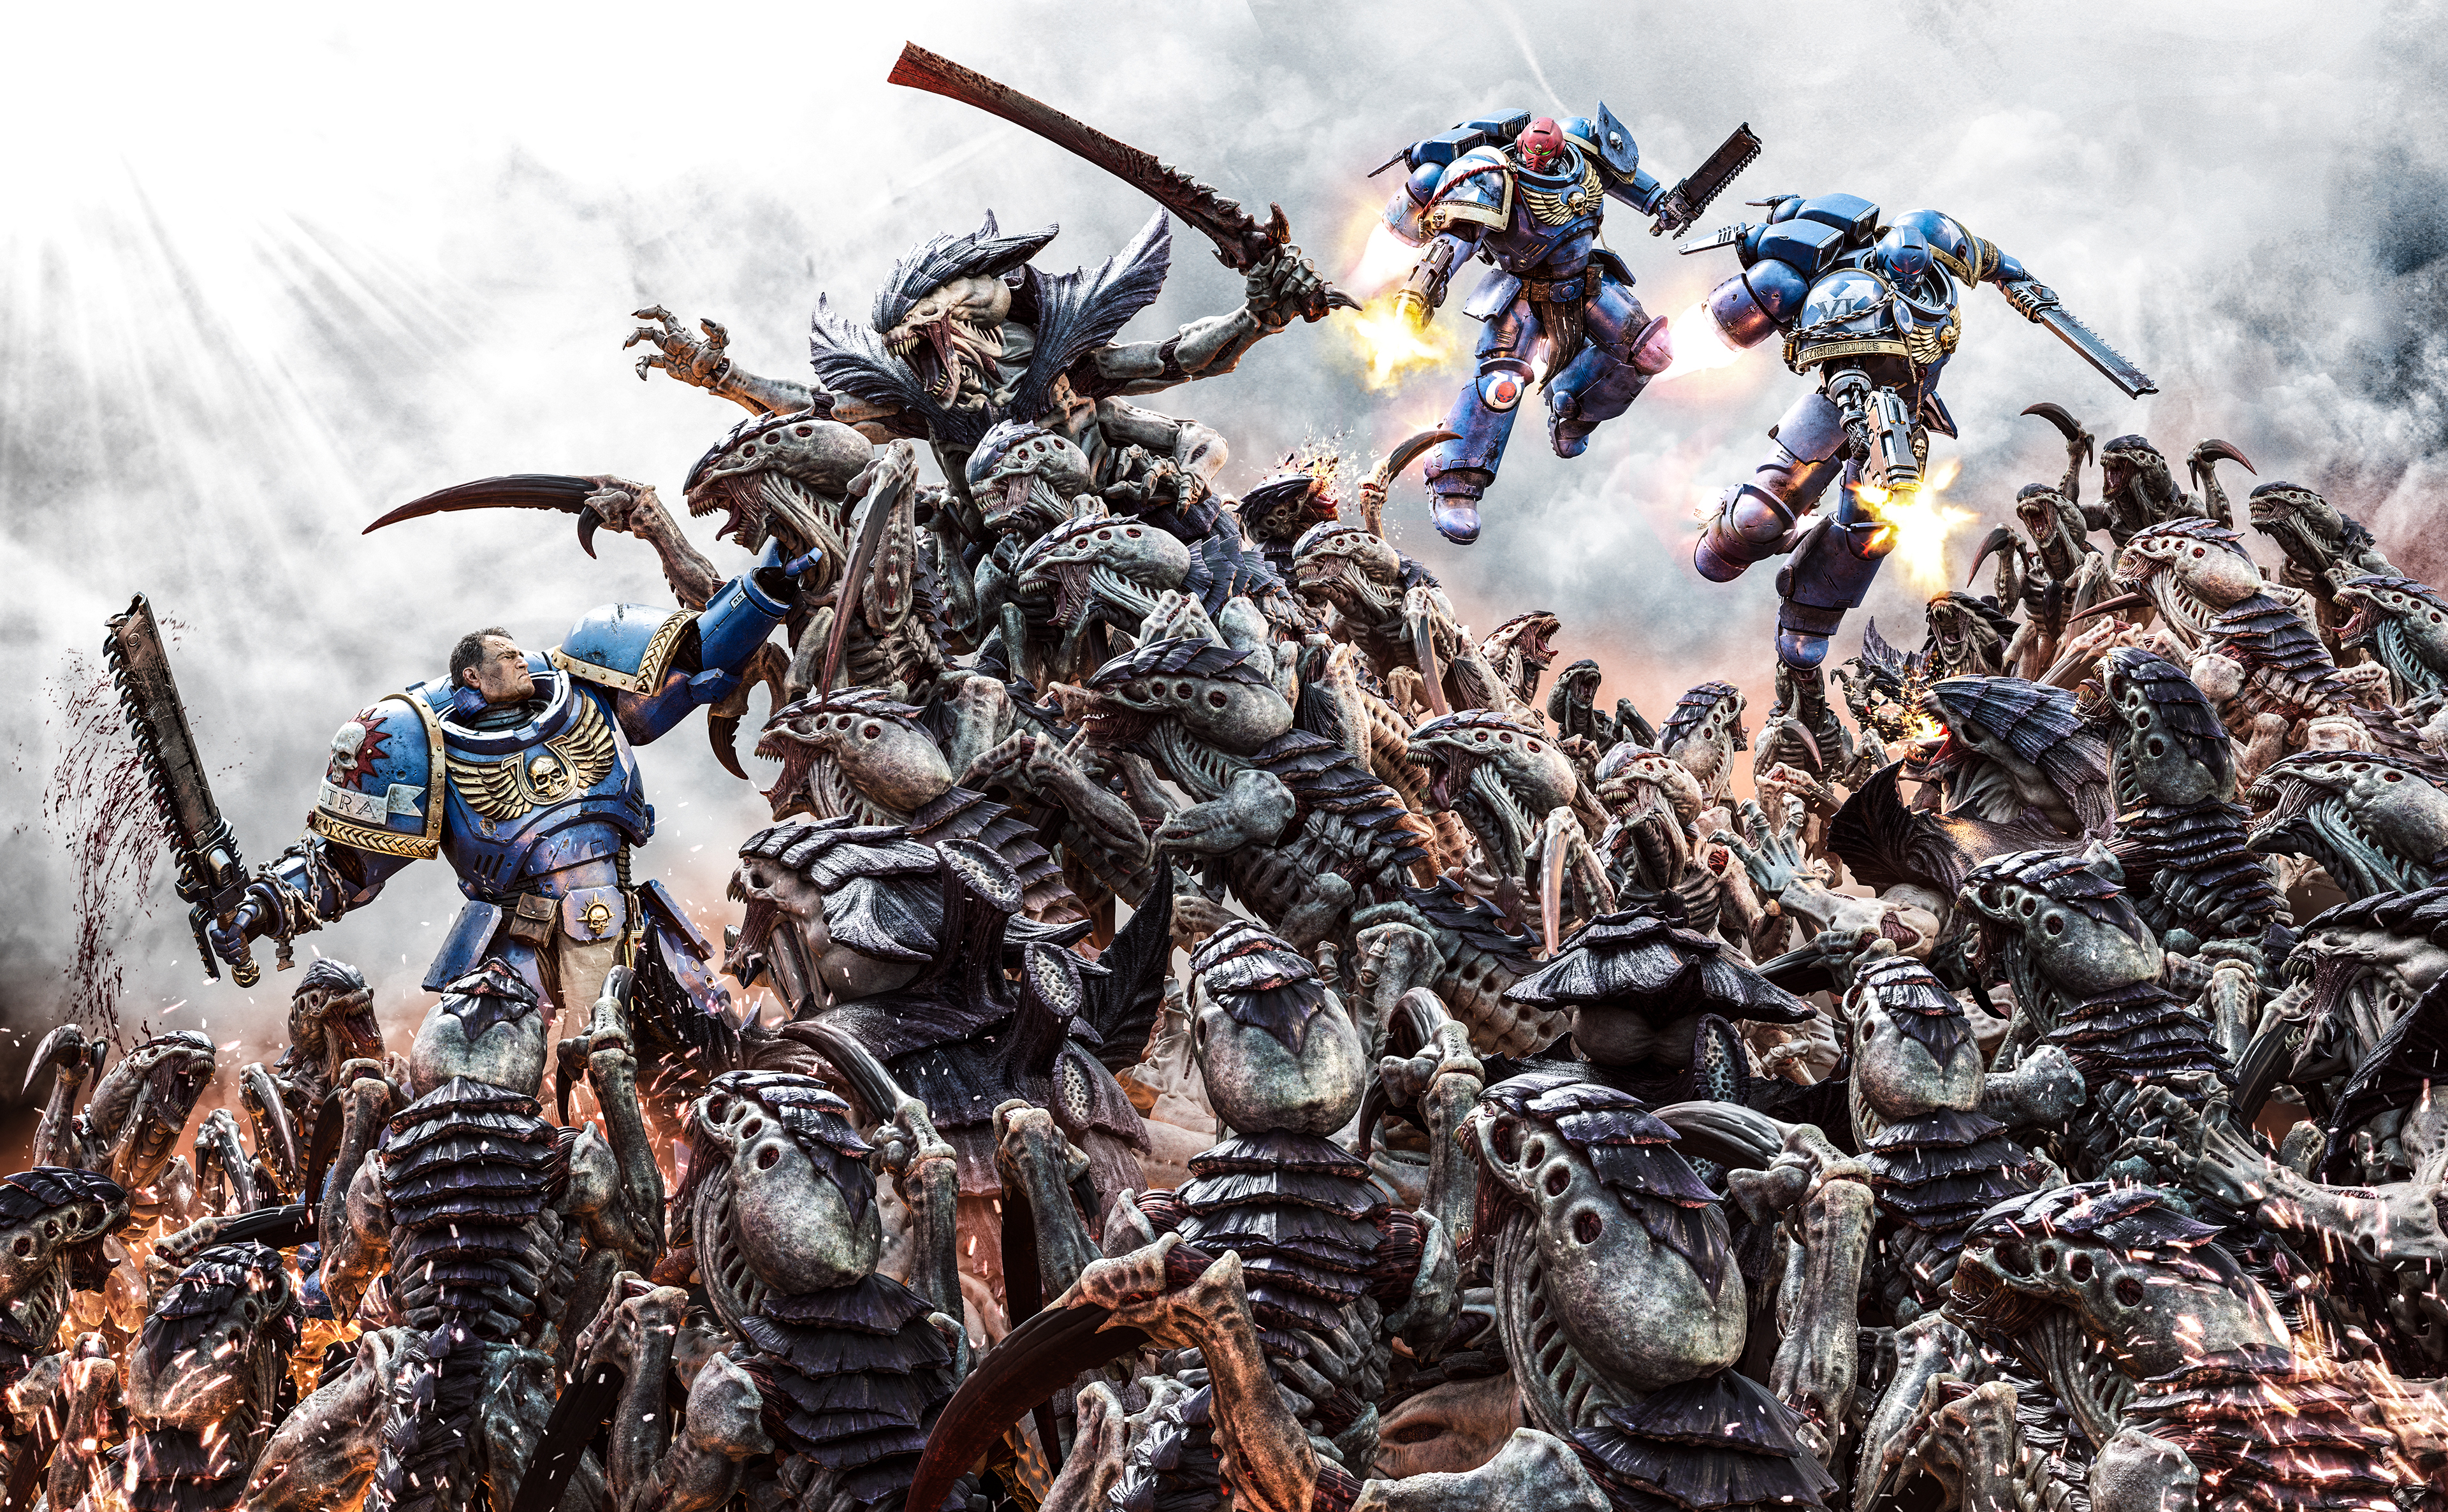 Key art for Space Marine 2, showing Titus and two Ultramarines fighting their way through a pile of the insectoid alien Tyranid.